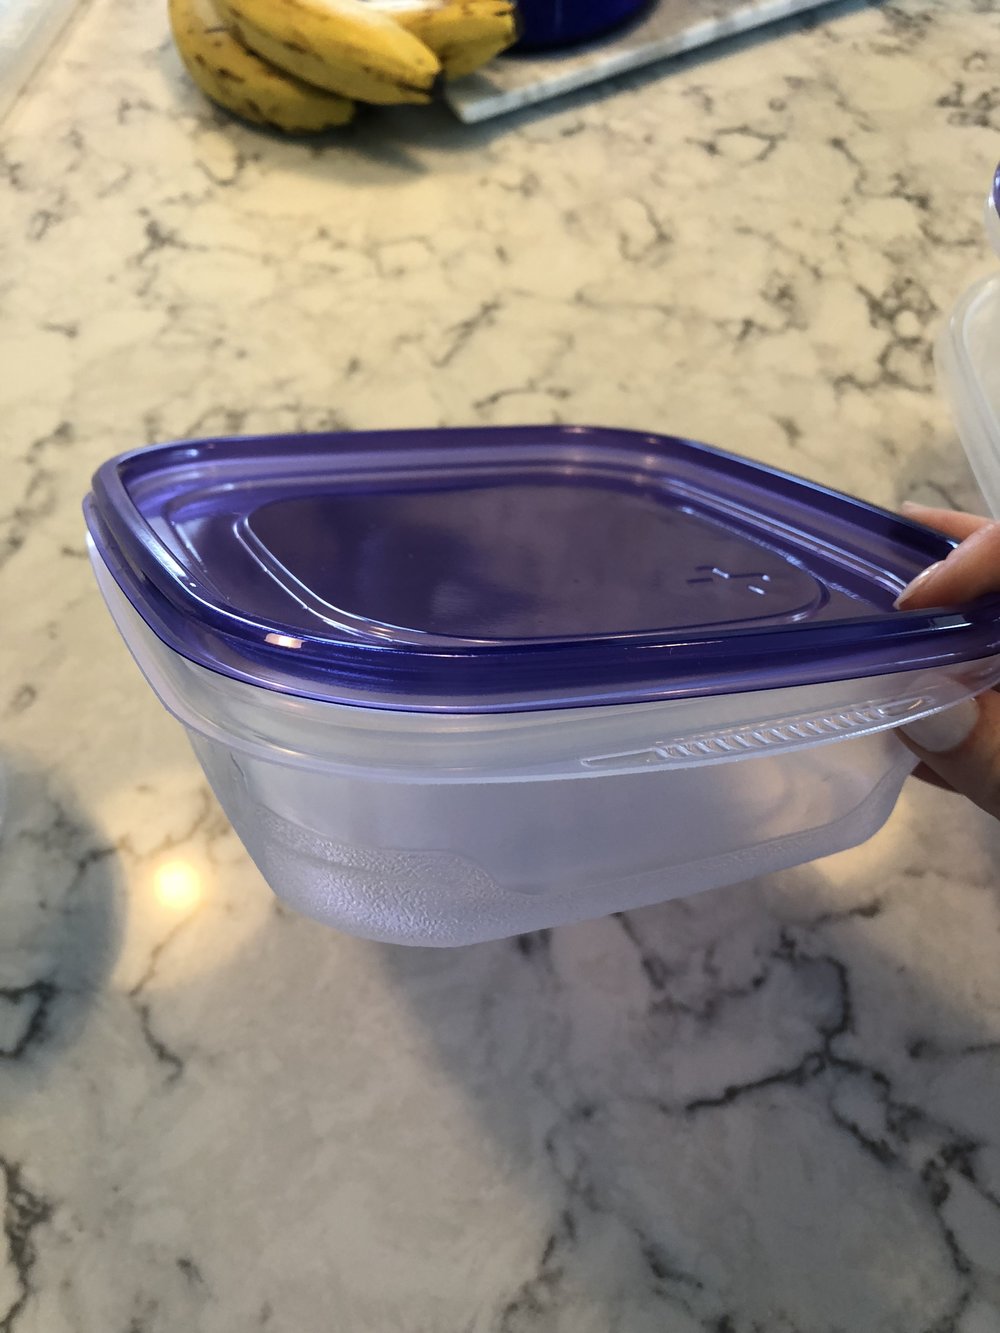 Medium - 25 ounces. Great for meal prep and left overs.